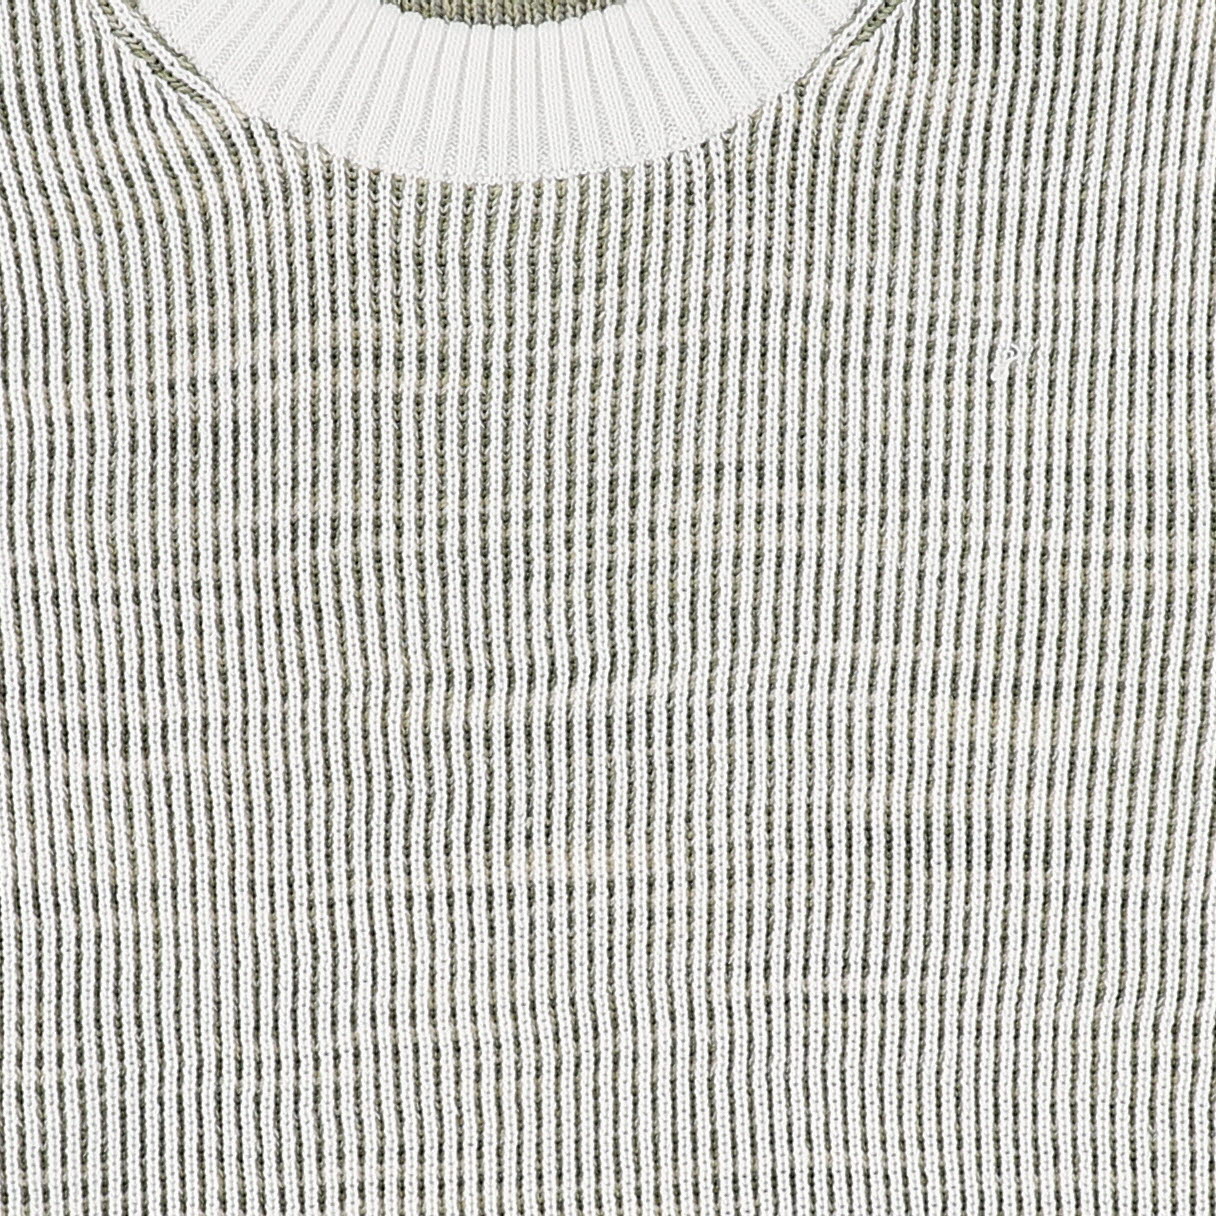 LE BOURDON GREEN OMBRE RIBBED KNIT SWEATER